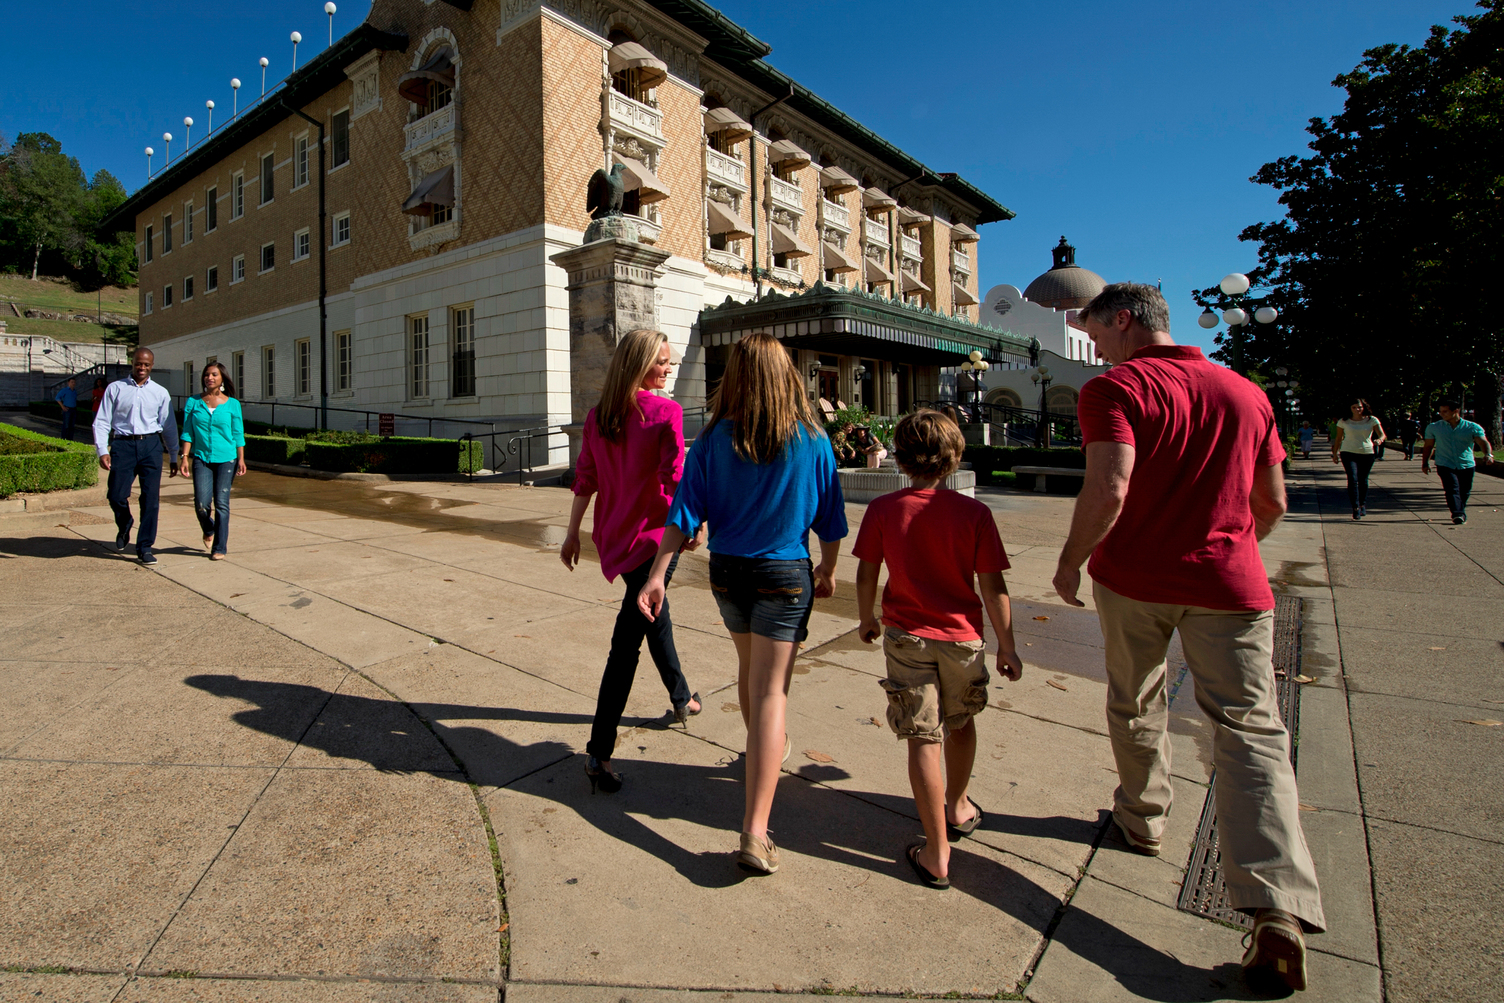 A family of four walks down a sidewalk towards a large ornate 3-story building.